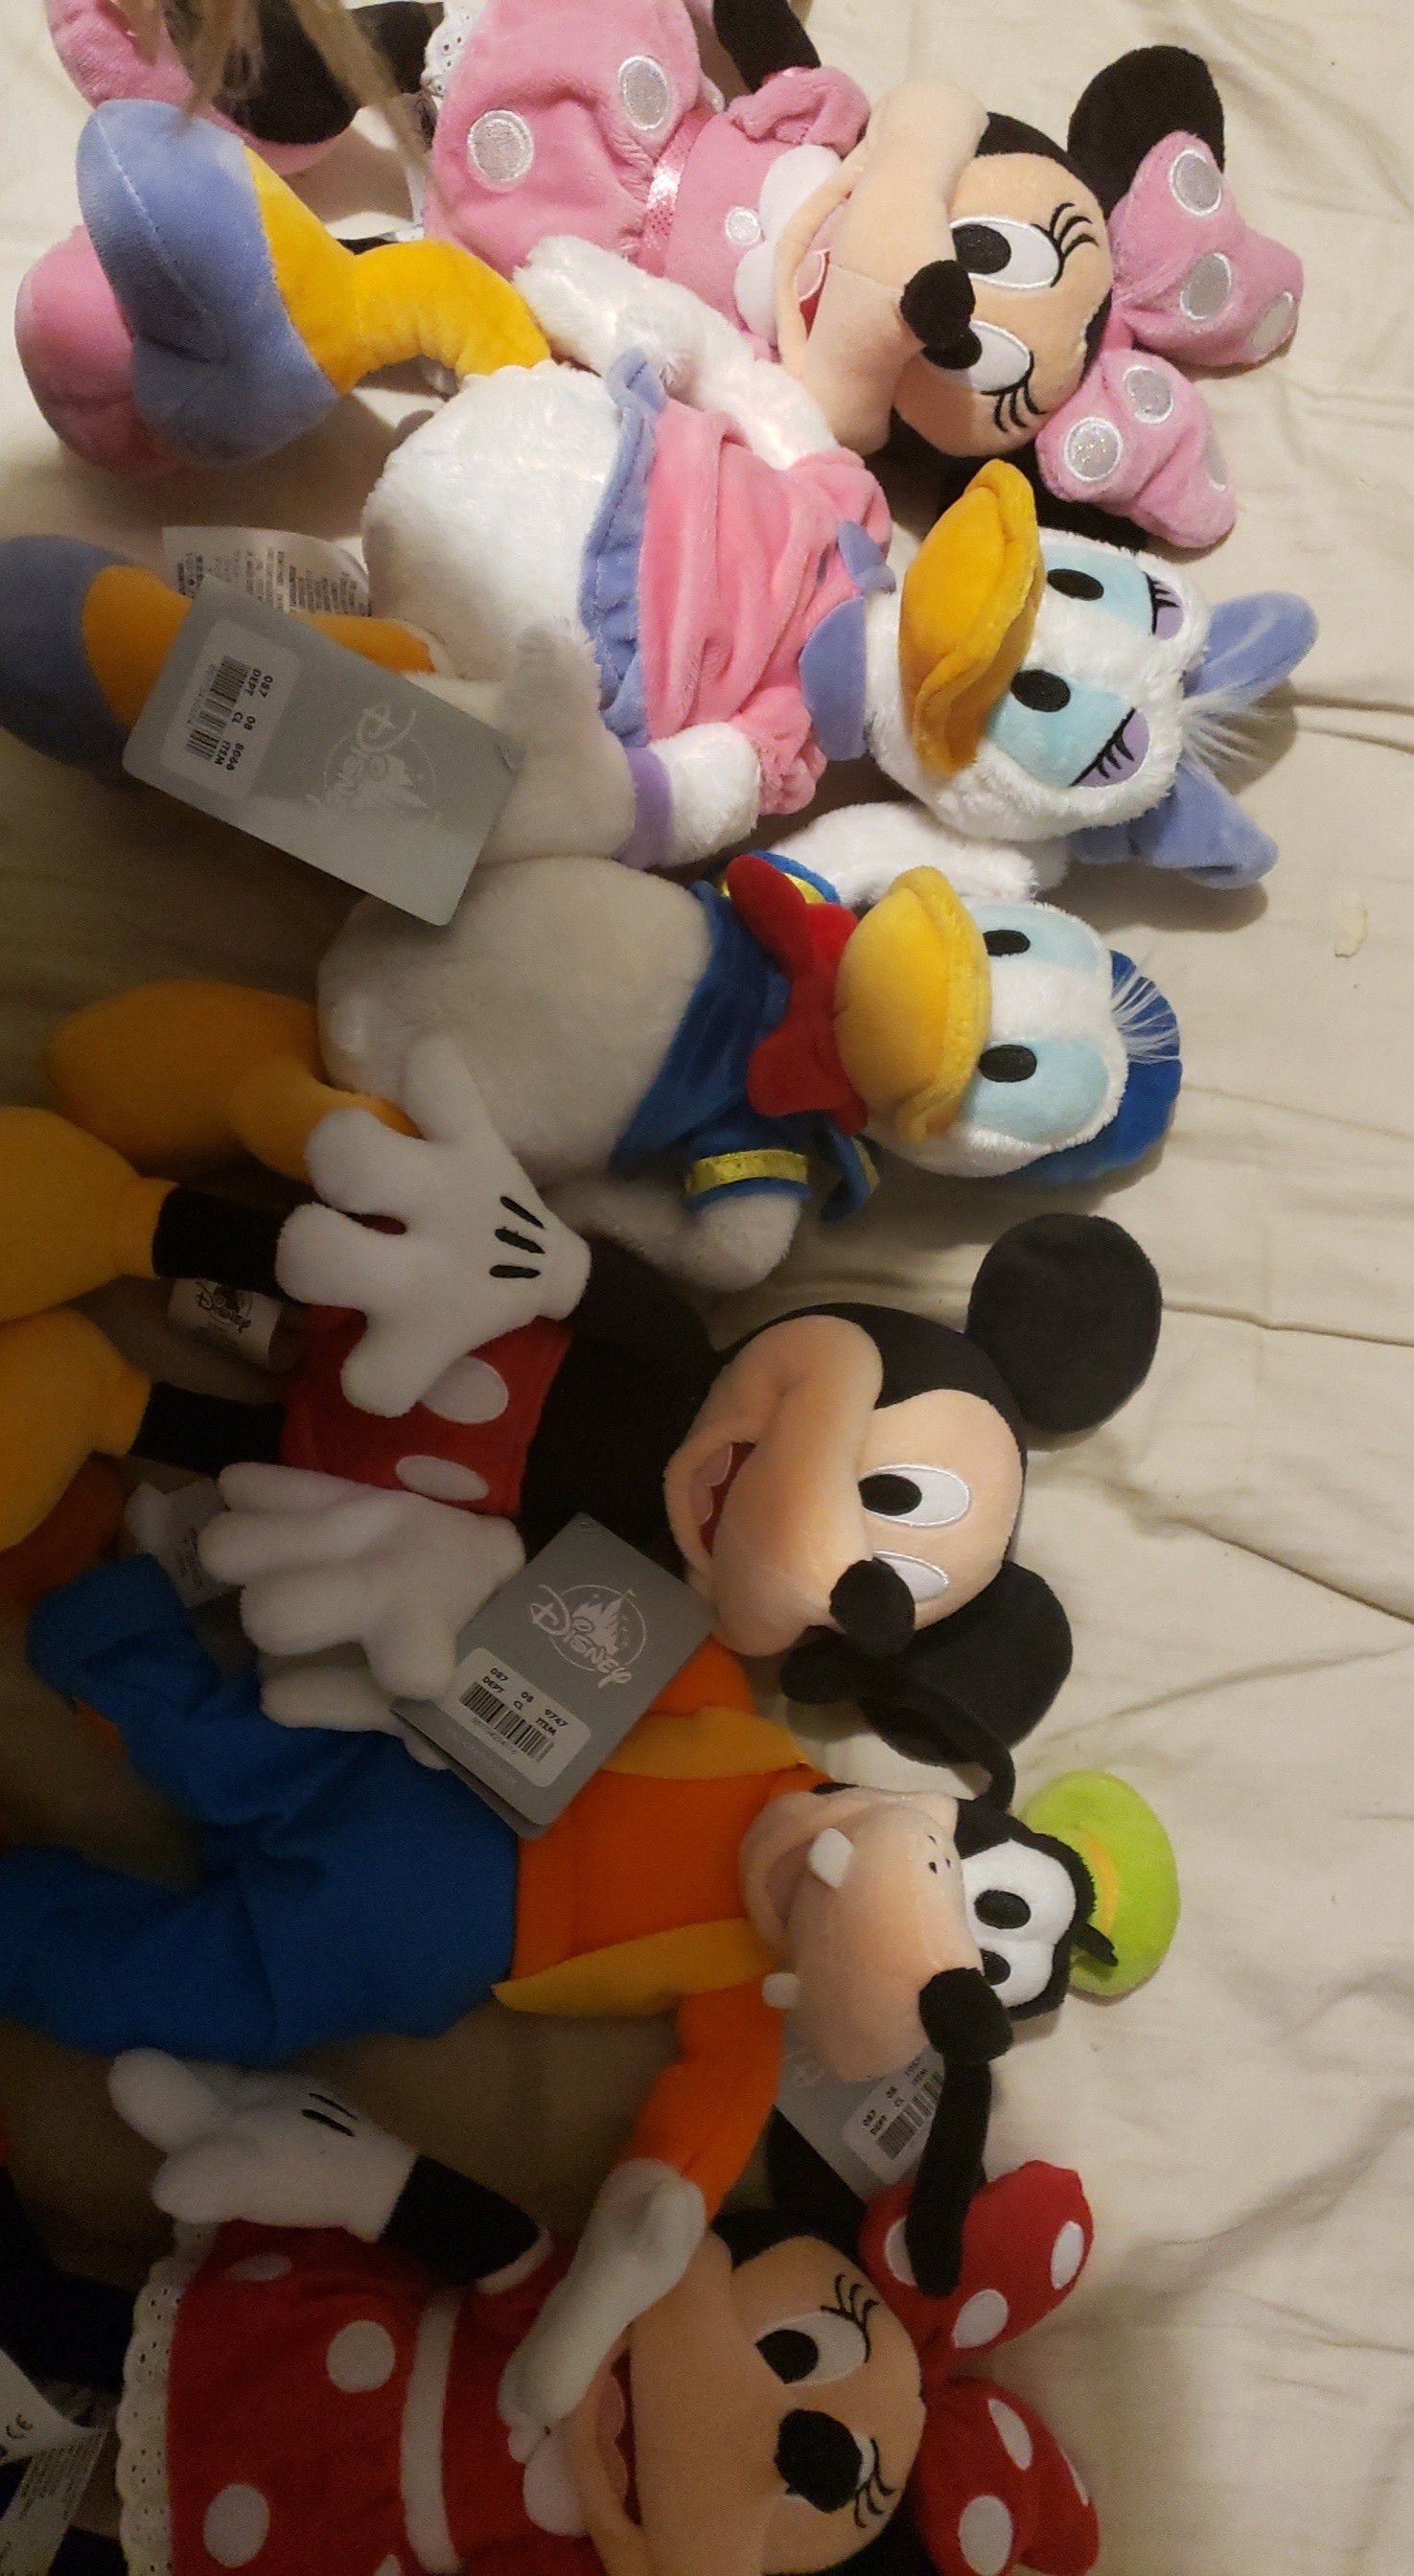 $9.5 each or $45 for all 6 Disney Plush Mickey Minnie Red Minnie Pink Goofy Daisy Duck Donald Duck